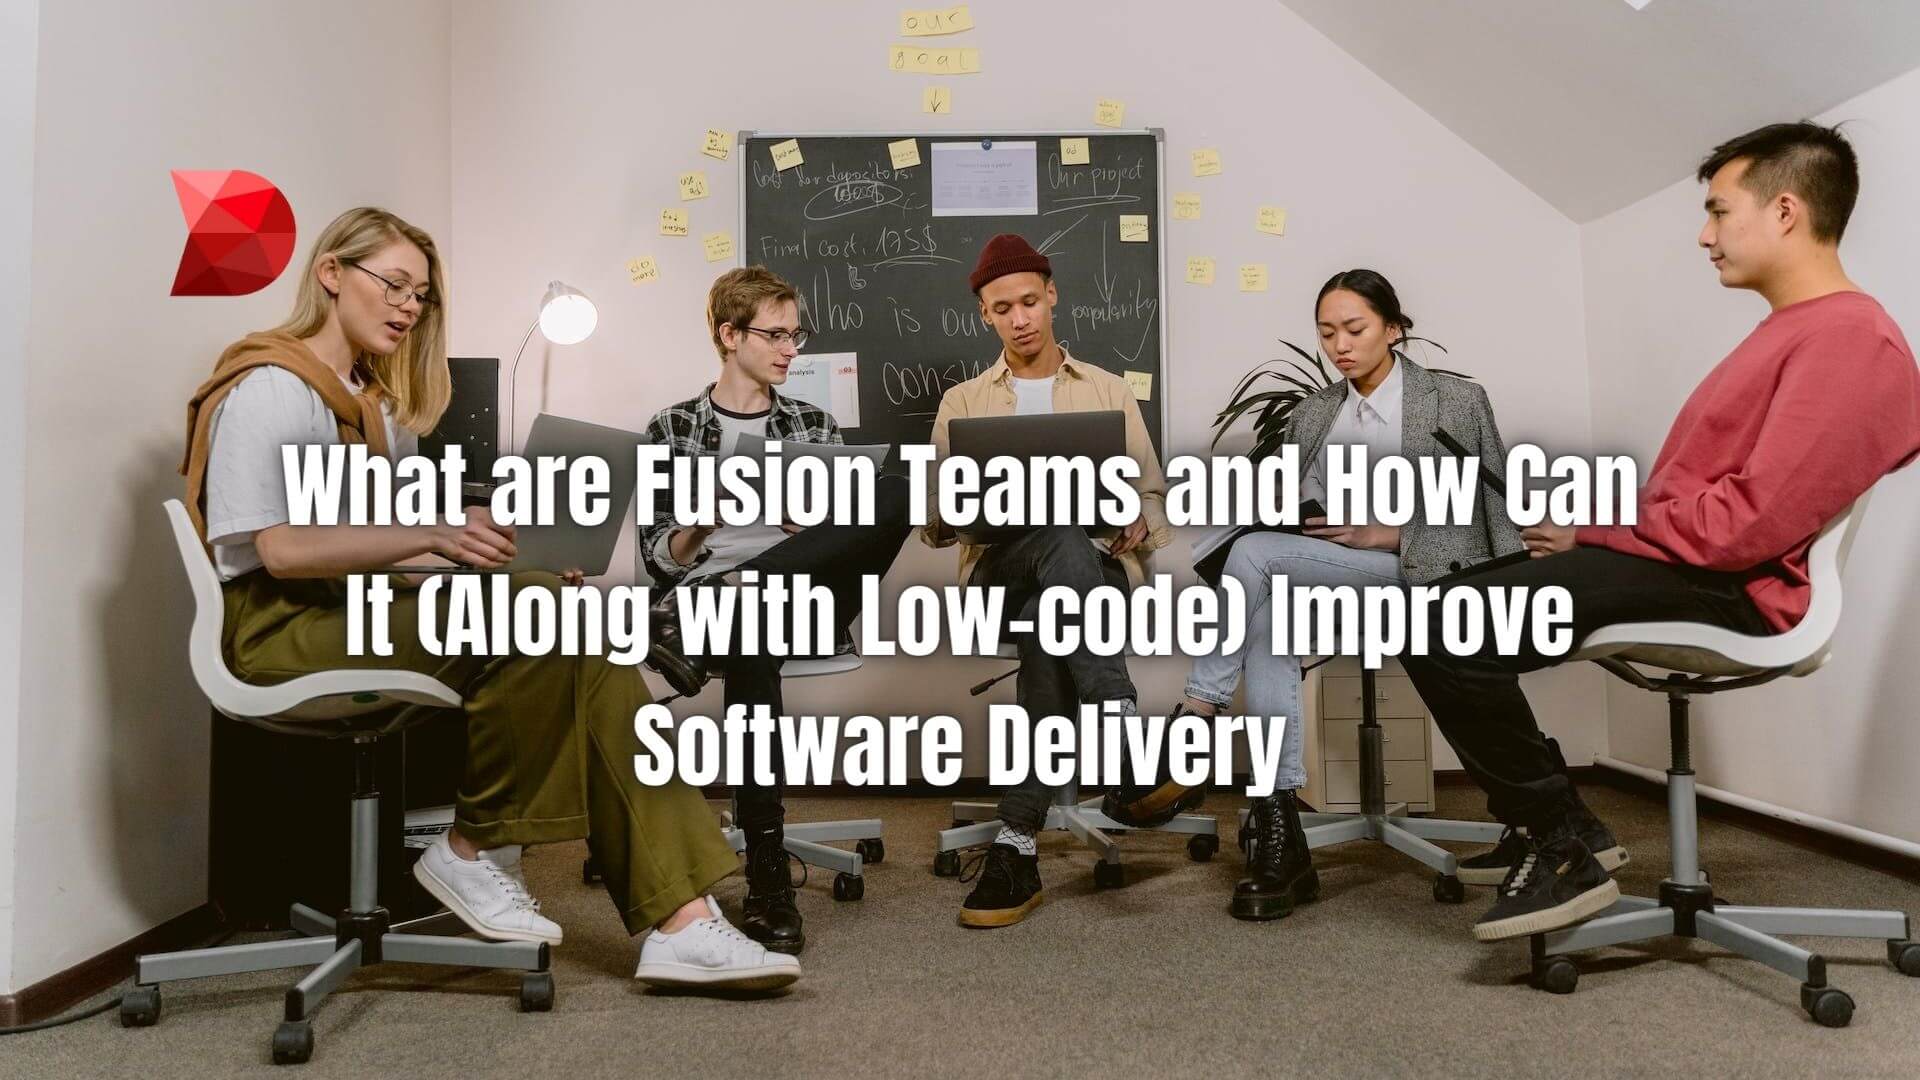 Empower your software delivery process with fusion teams! Click here to discover what they are and how they revolutionize software delivery.